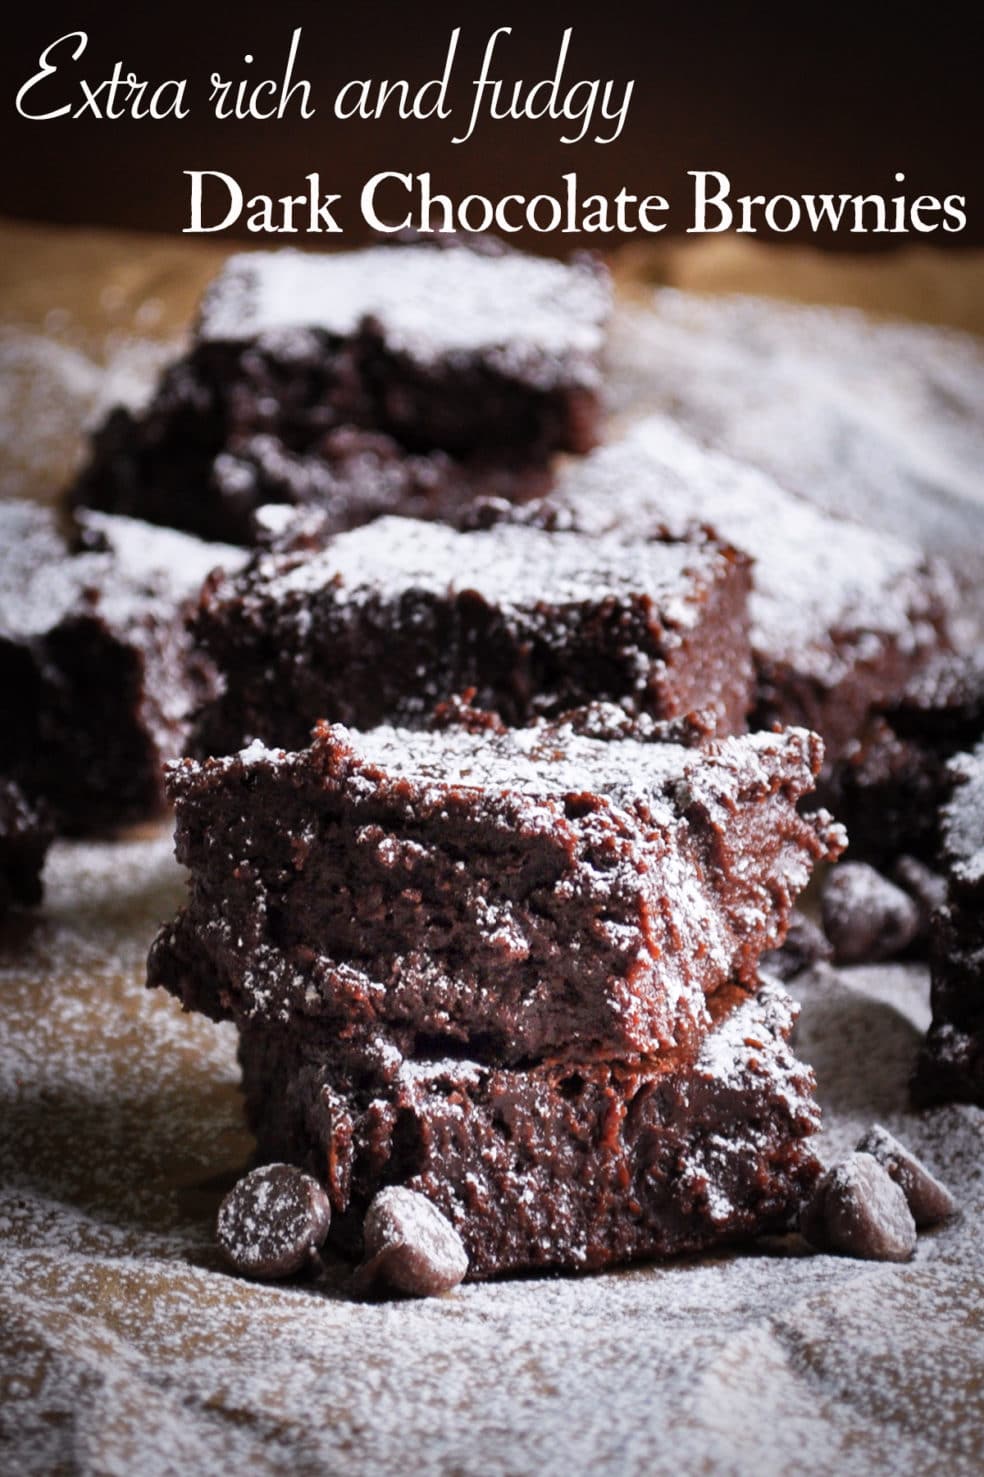 Two dark chocolate fudge brownies stacked on top of each other with more brownies in the background.